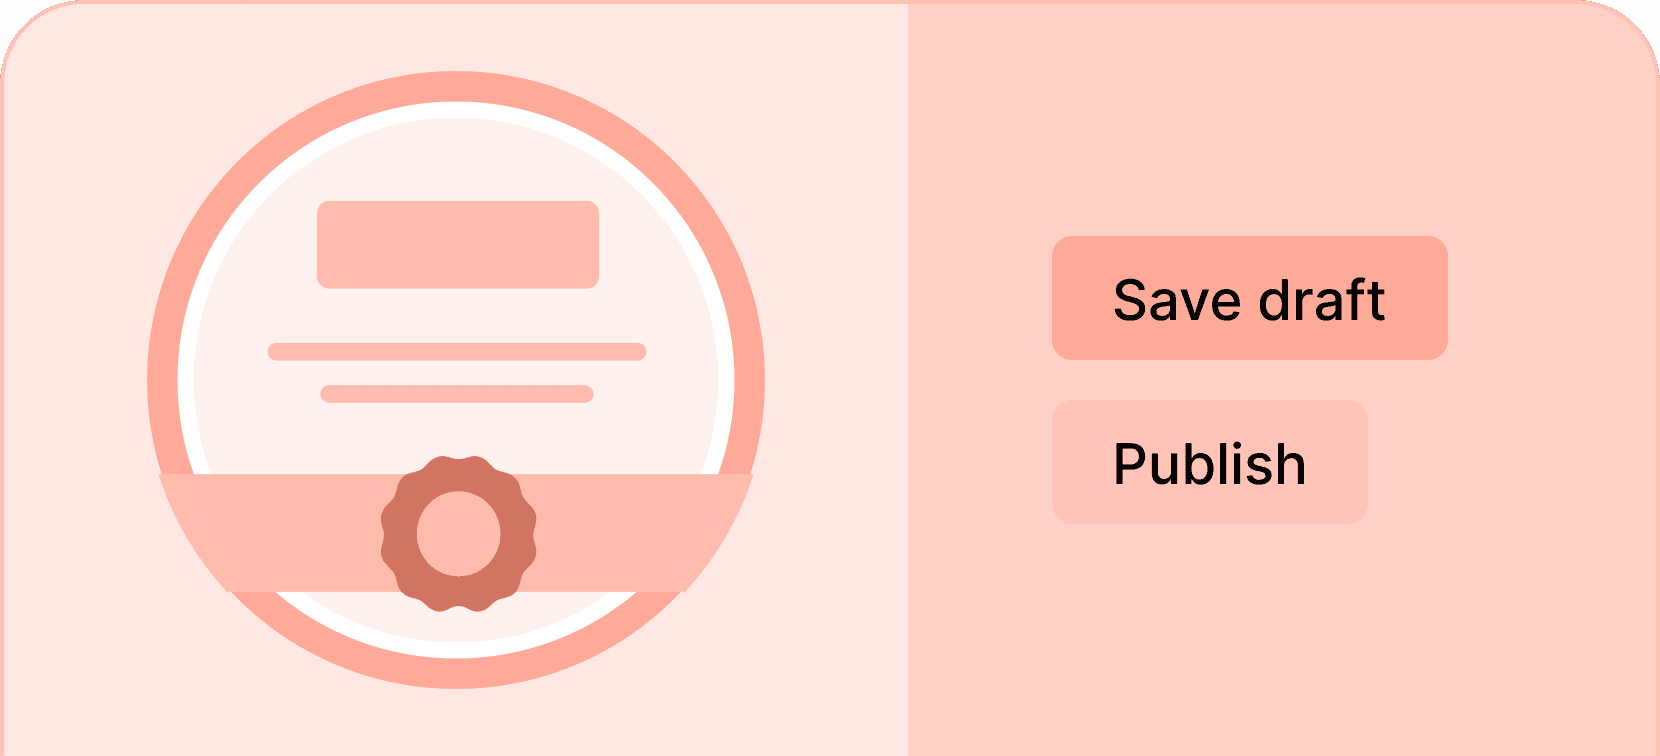 certifier-features-save-unfinished-documents